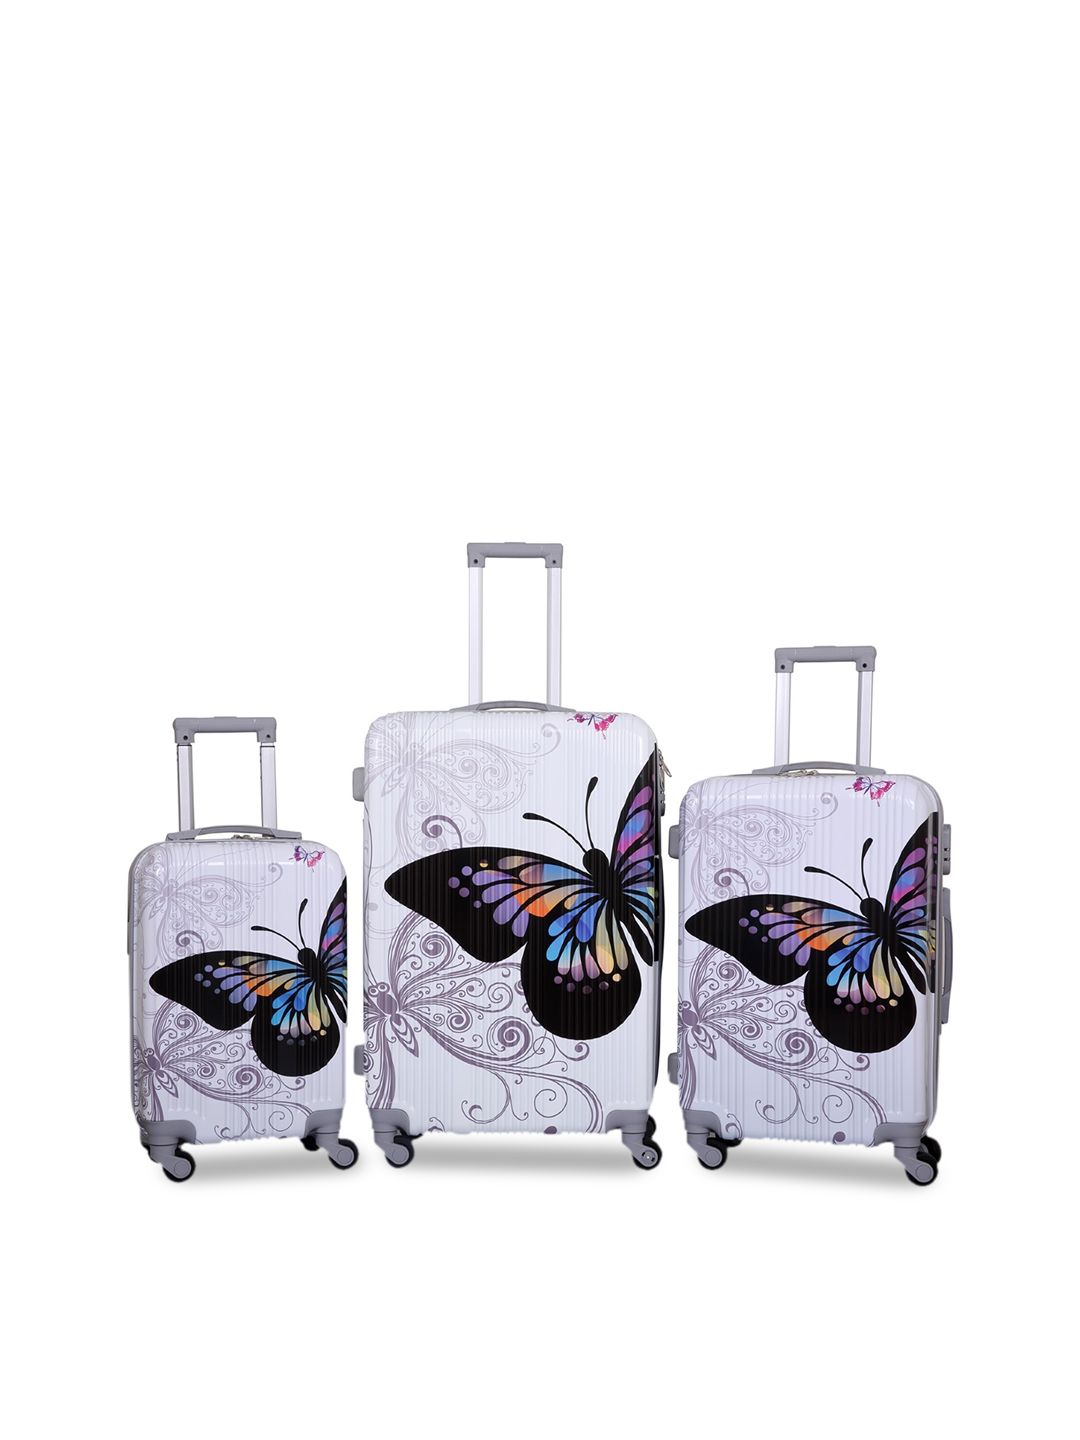 Polo Class Set Of 3 White & Black Printed Hard-Sided Trolley Suitcases Price in India